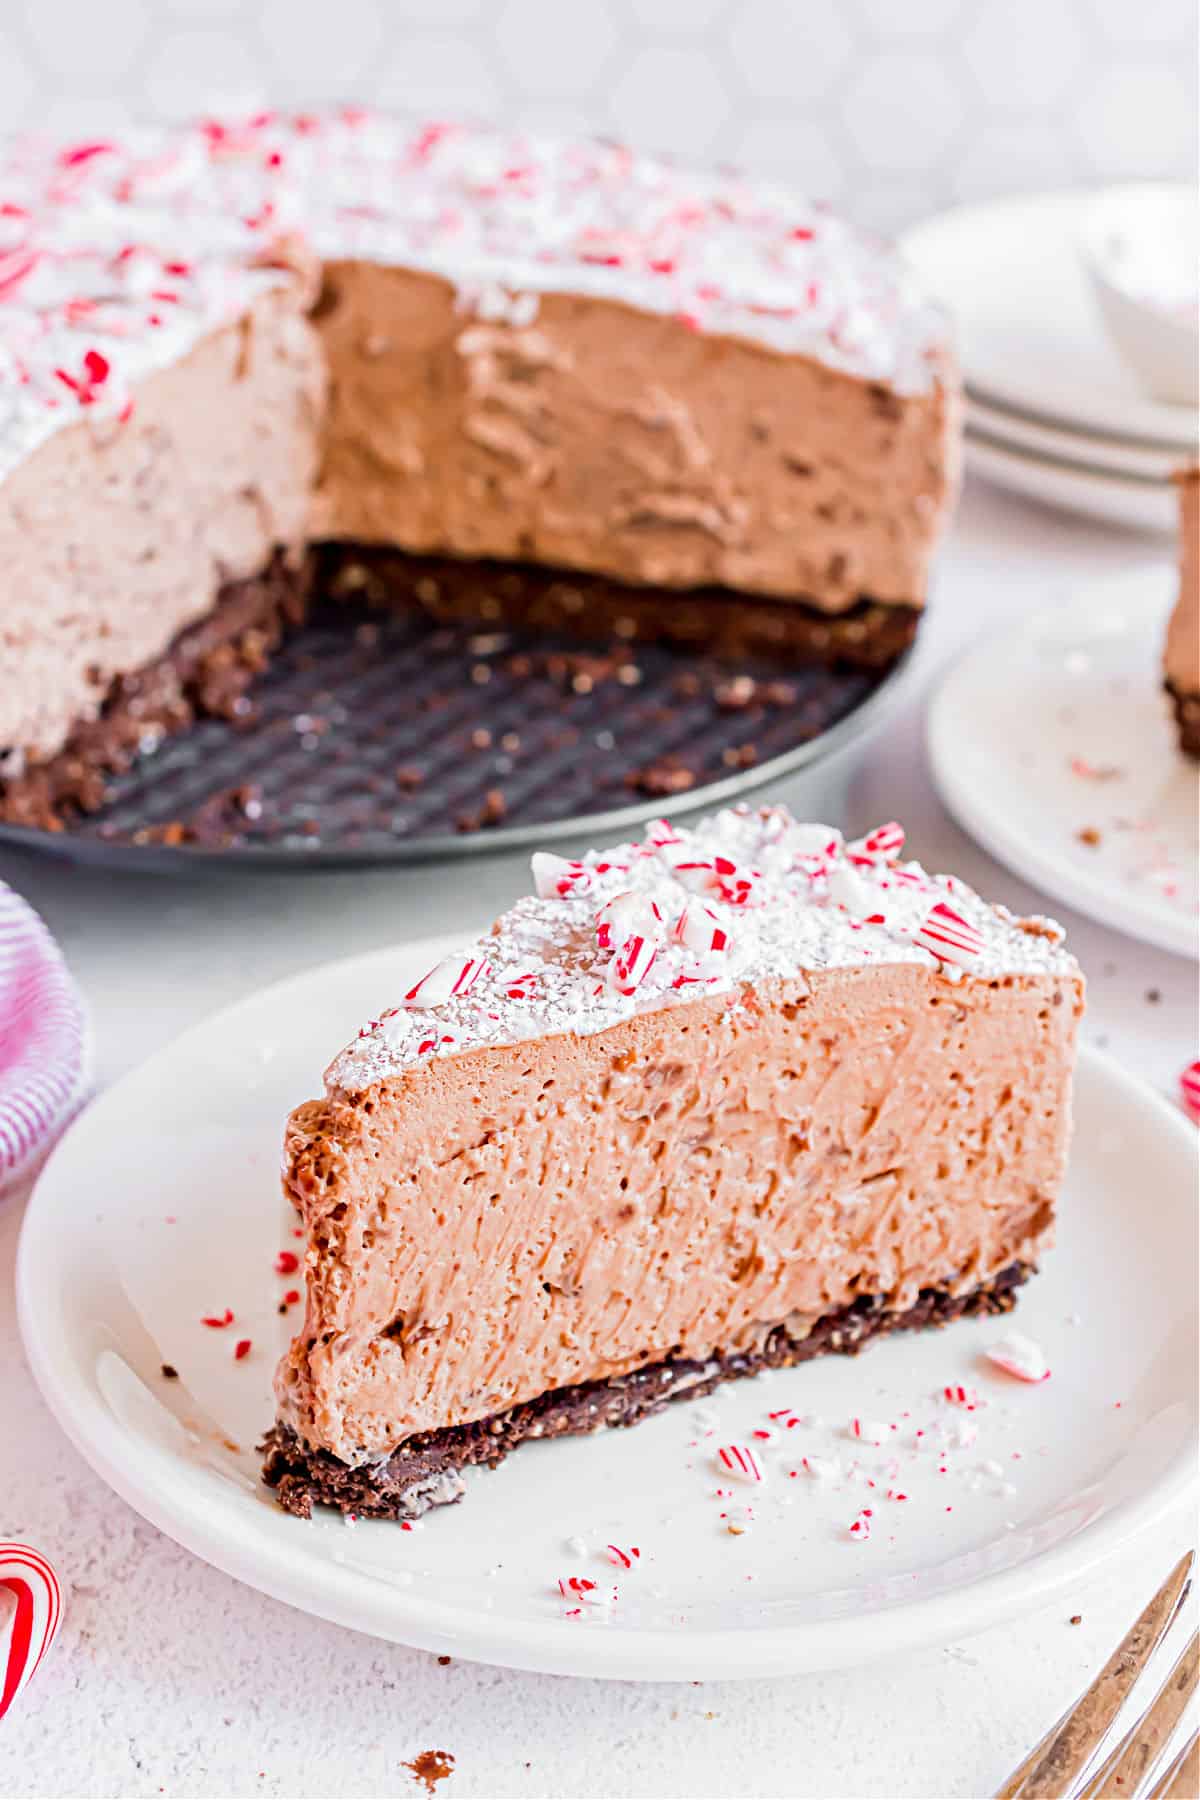 Slice of hazelnut mousse pie with candy canes on dessert plate.